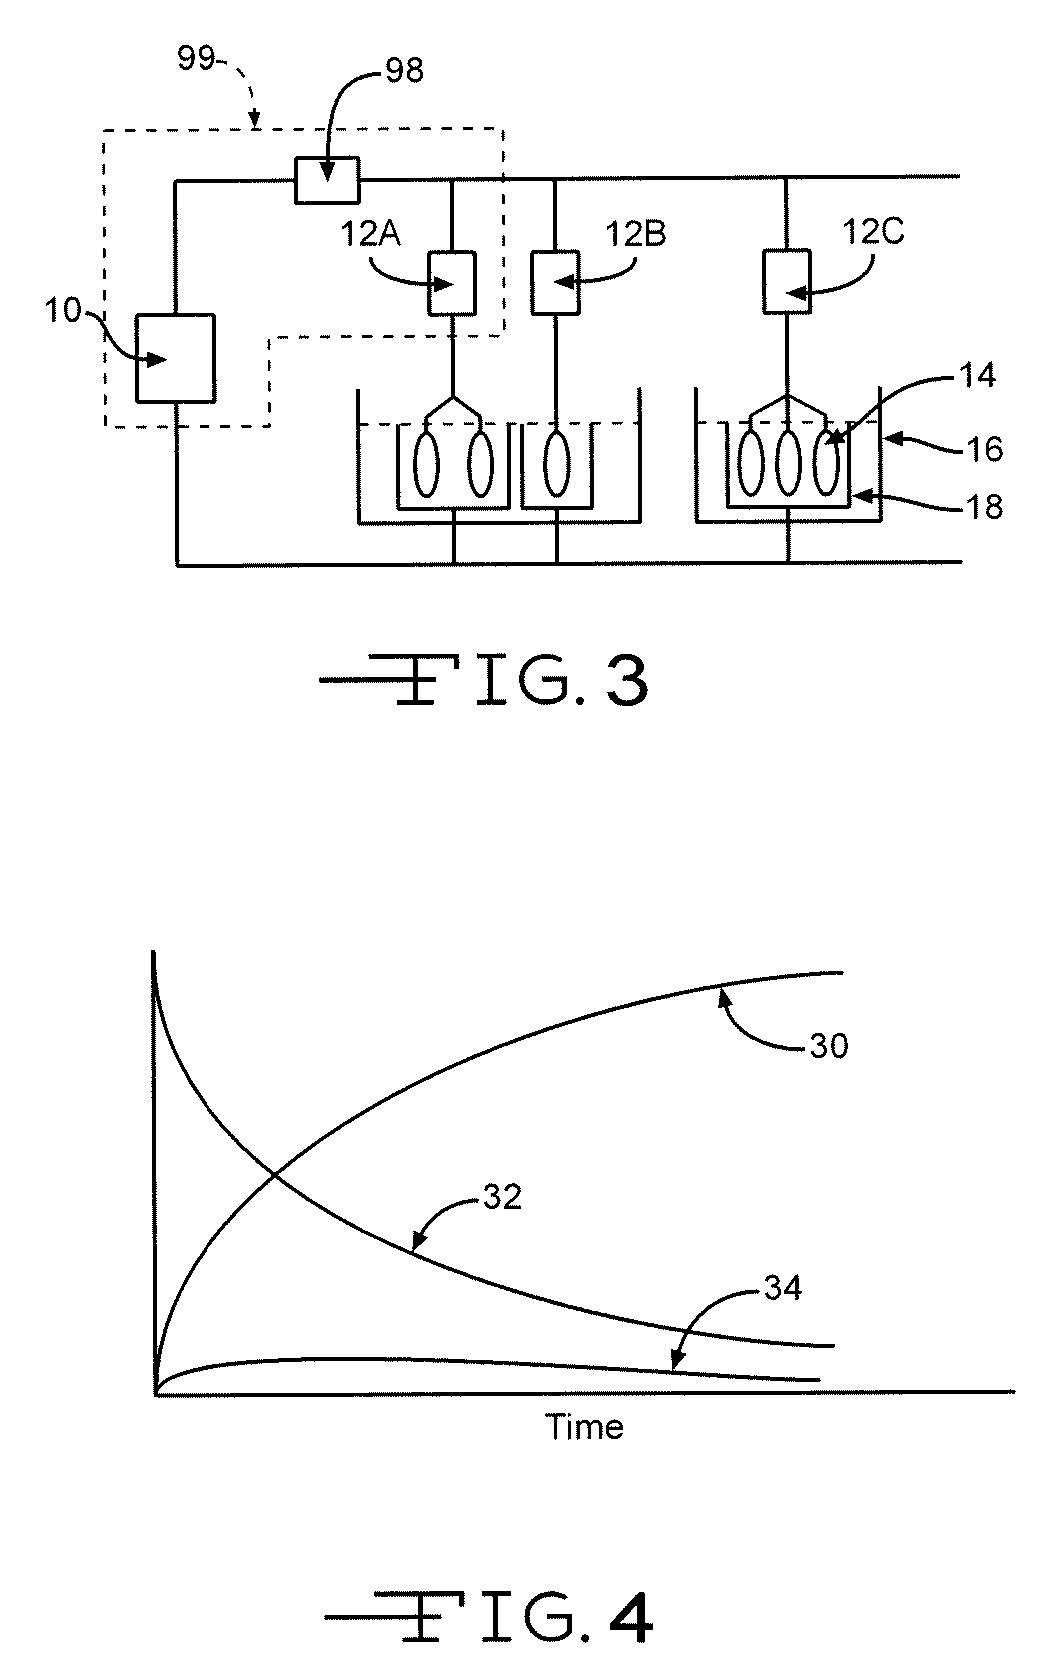 Anodizing valve metals by self-adjusted current and power